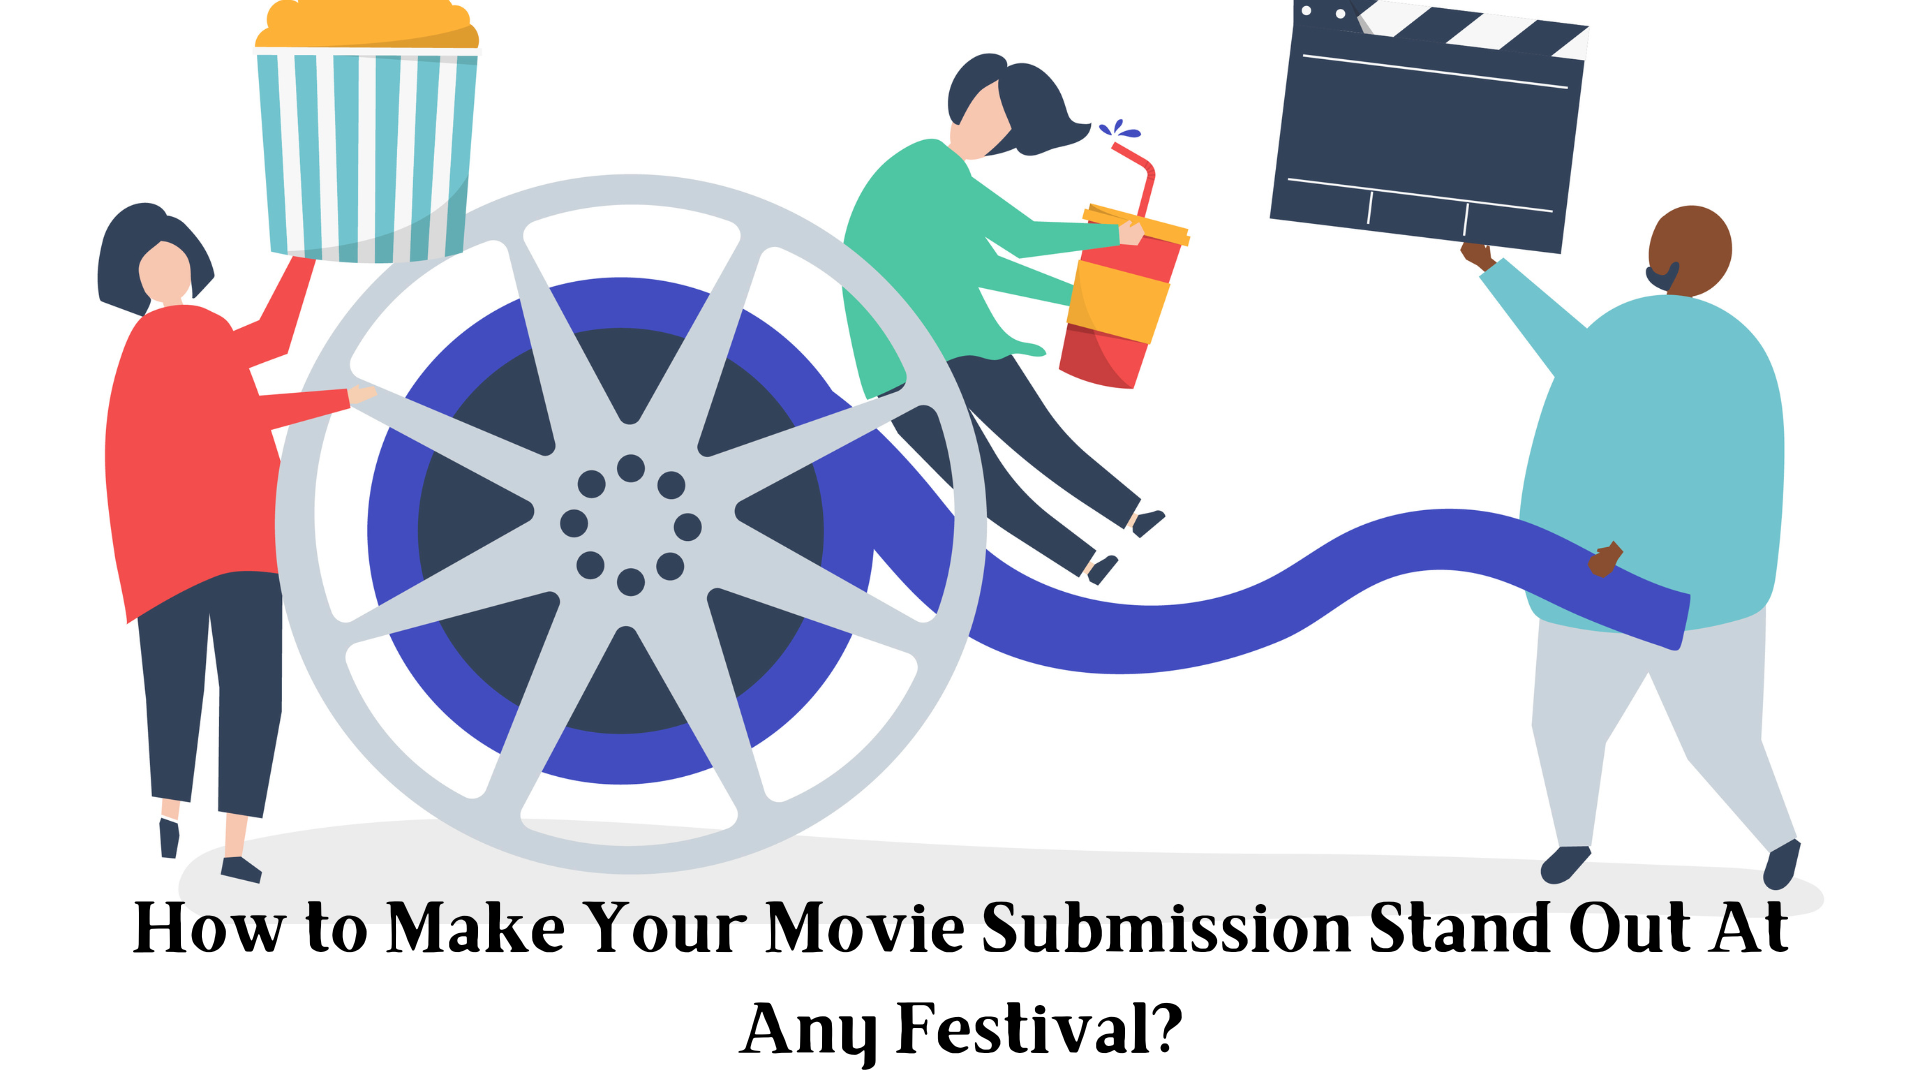 How to Make Your Movie Submission Stand Out At Any Festival